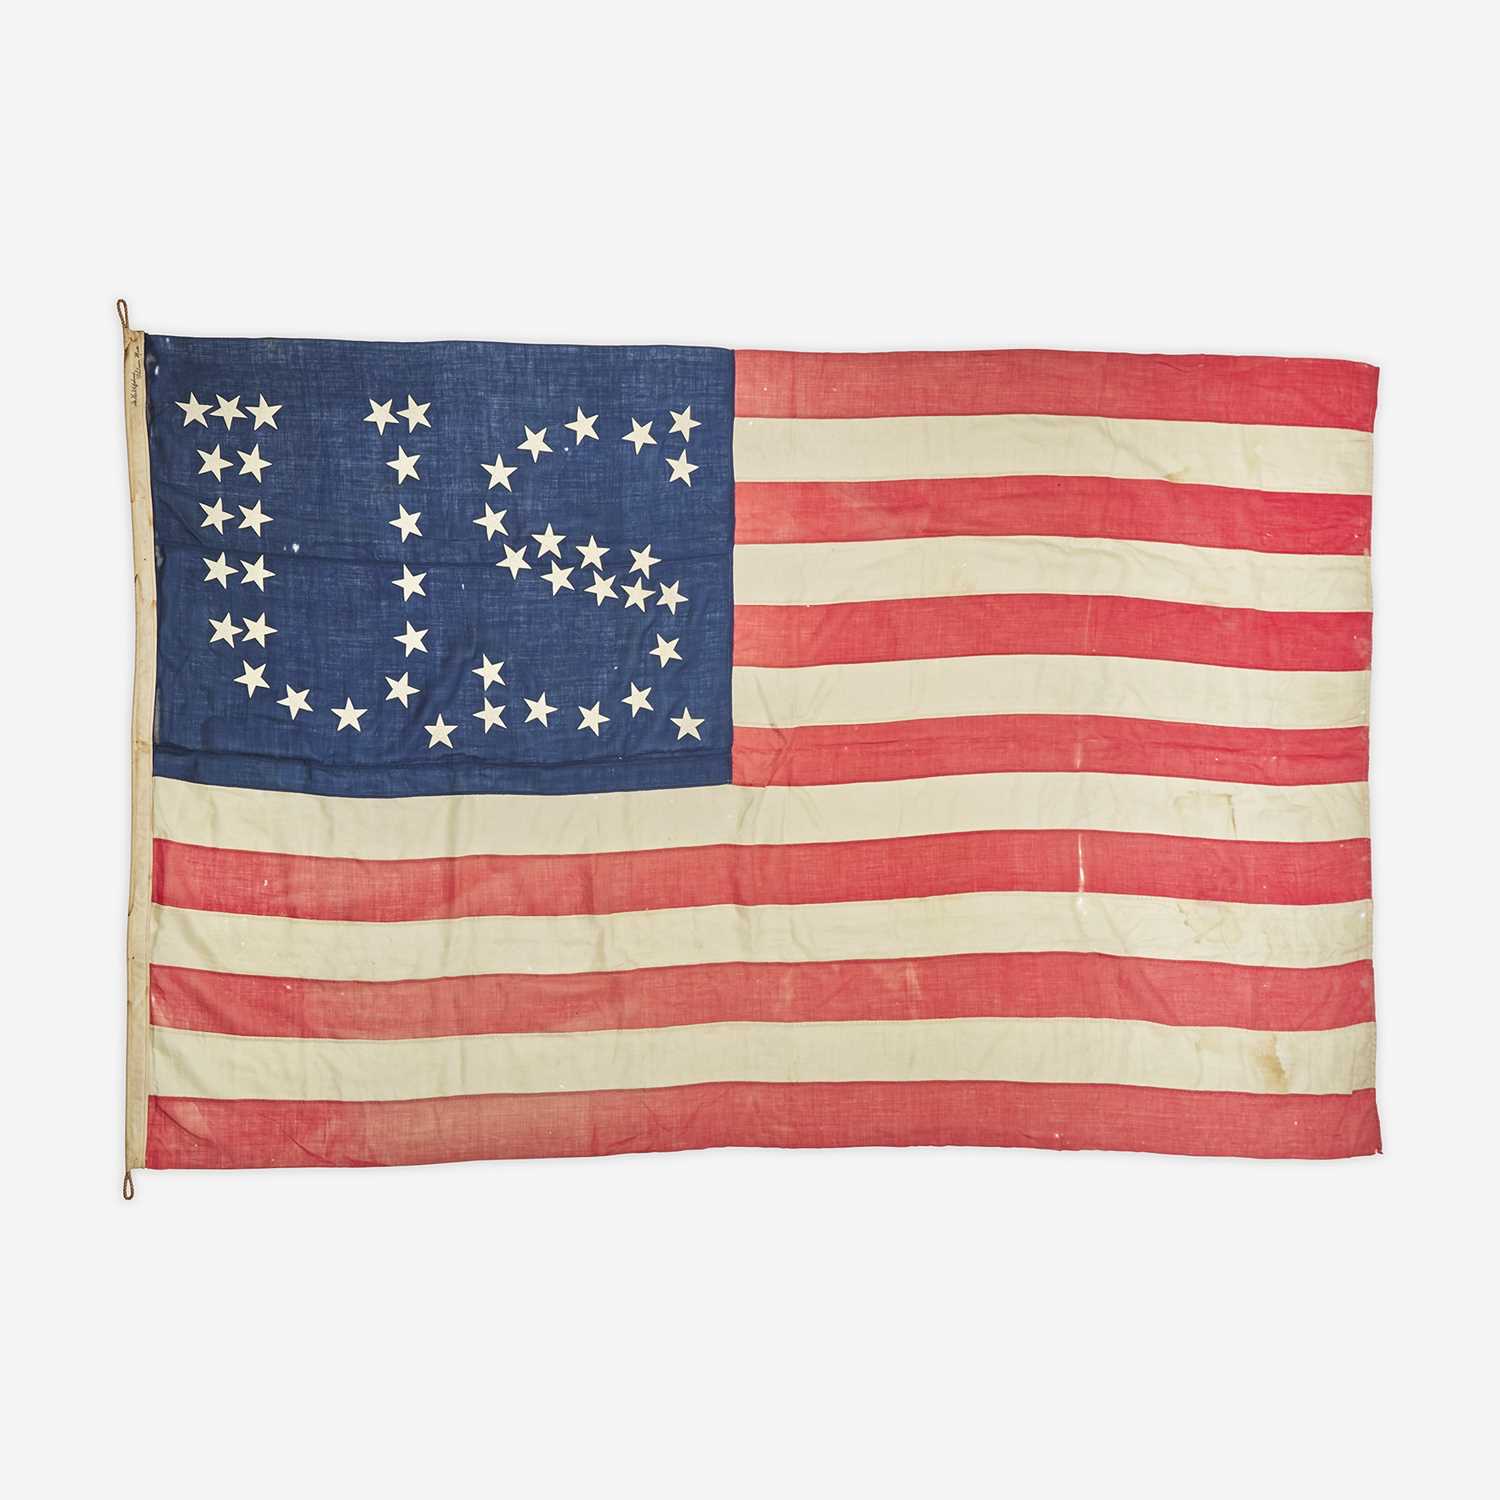 Lot 36 - A  rare 44-Star American National Flag commemorating Wyoming statehood